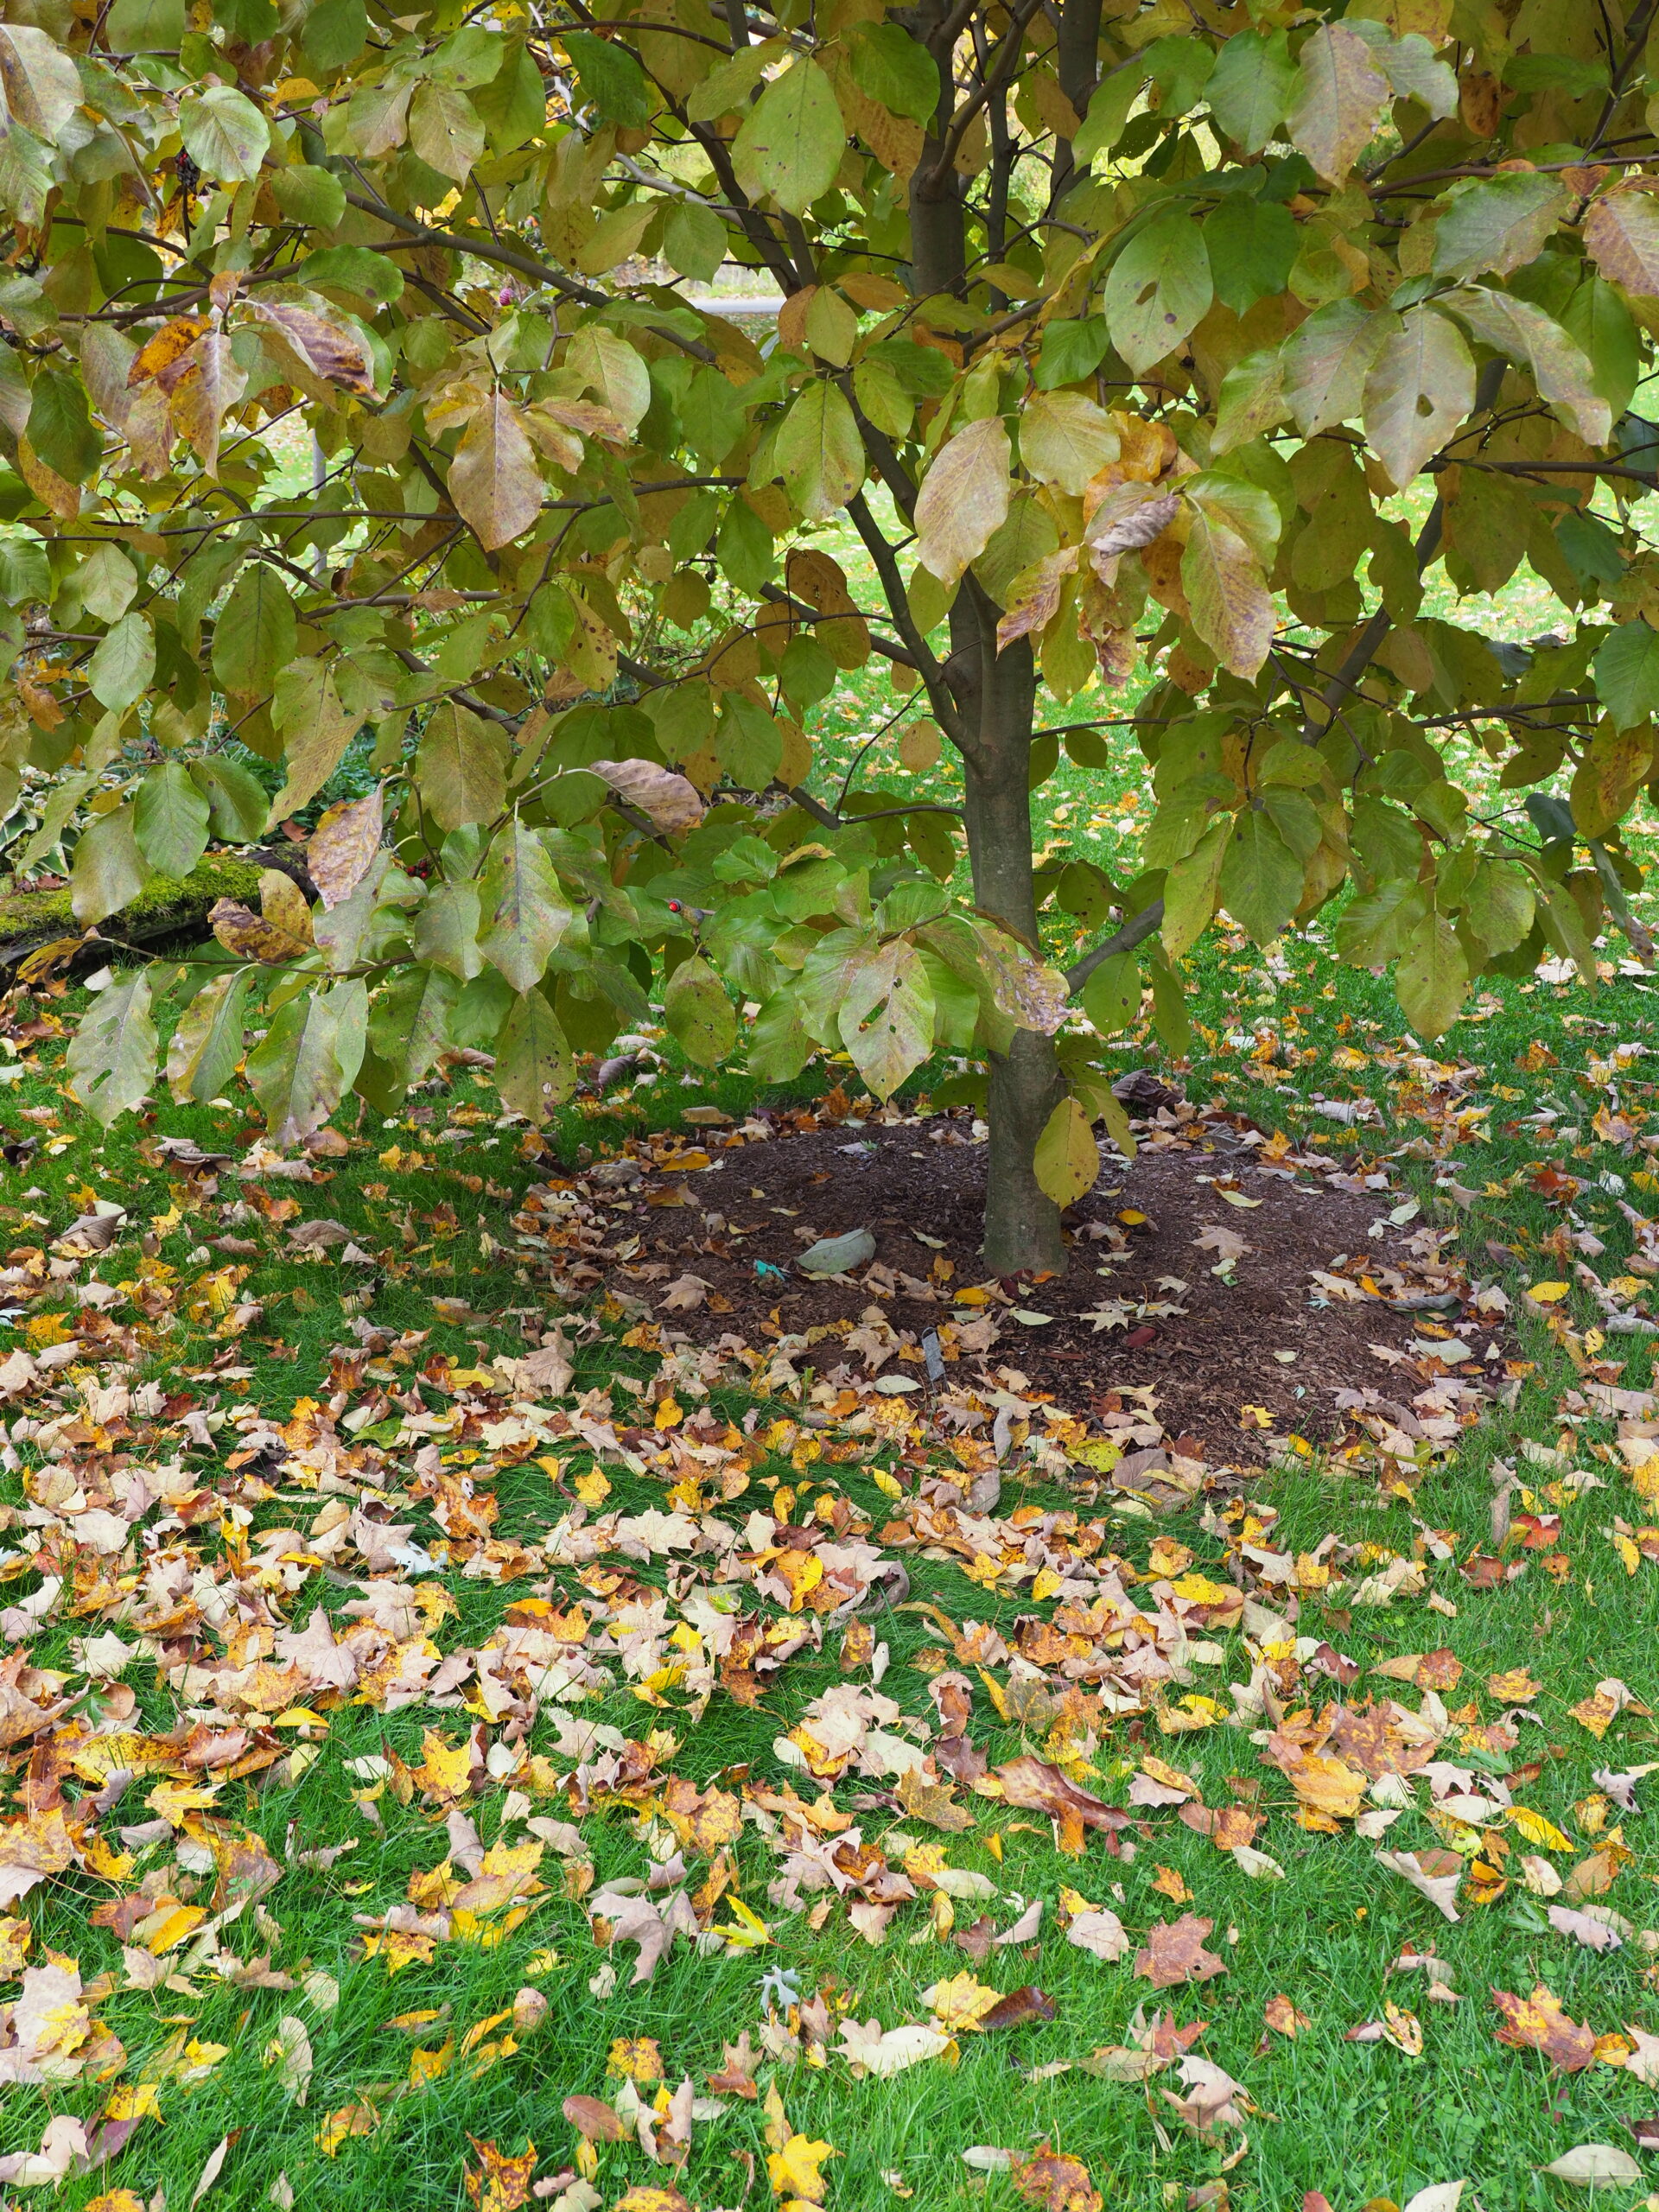 Note how small the mulch ring is at the bottom of this 18-foot-tall and 10-foot-wide magnolia. The mulch ring keeps the grass away from the tree while the nutrients from the decaying mulch become part of the nutrients that the tree can use. This mulch ring is  5 feet in diameter, but to be really effective it should be twice that.
ANDREW MESSINGER